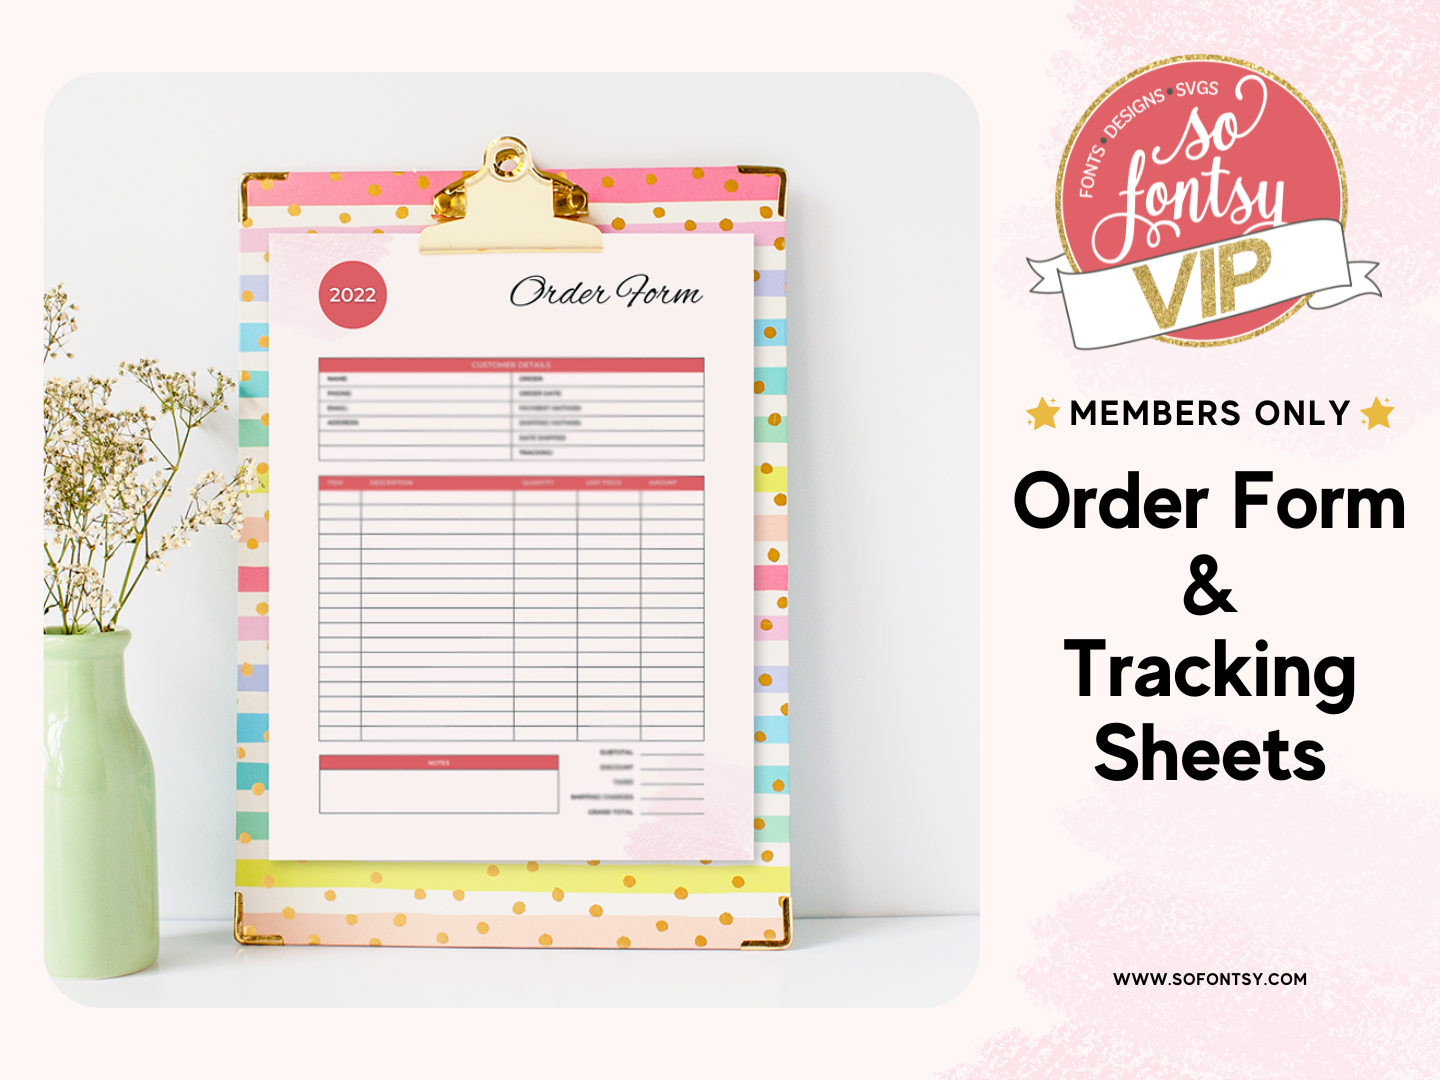 Order Form and Tracking Sheet So Fontsy VIP Resource